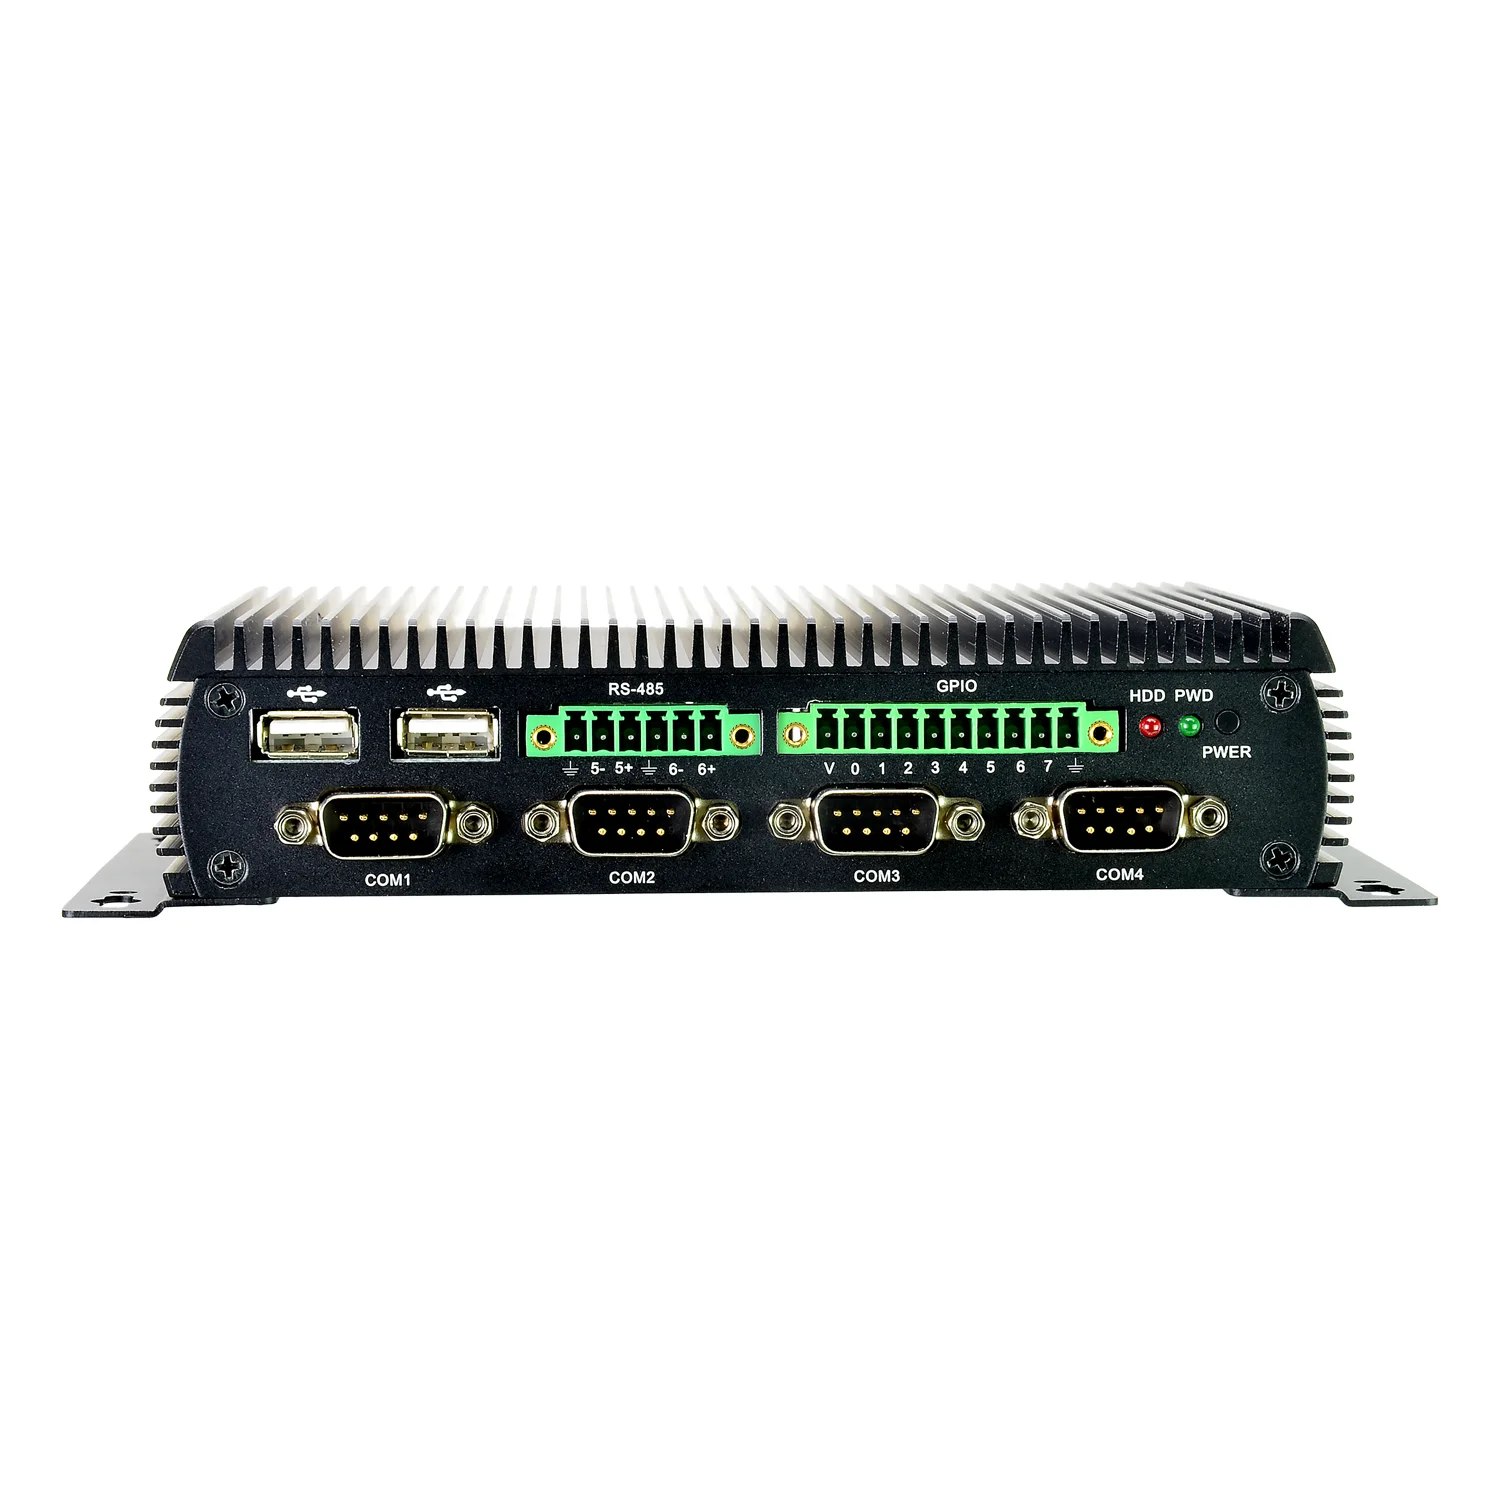 Fanless Embedded Box PC Based on NXP i.MX 6 Series CPU with RS232/485, Dual Display and GPIO Function enlarge